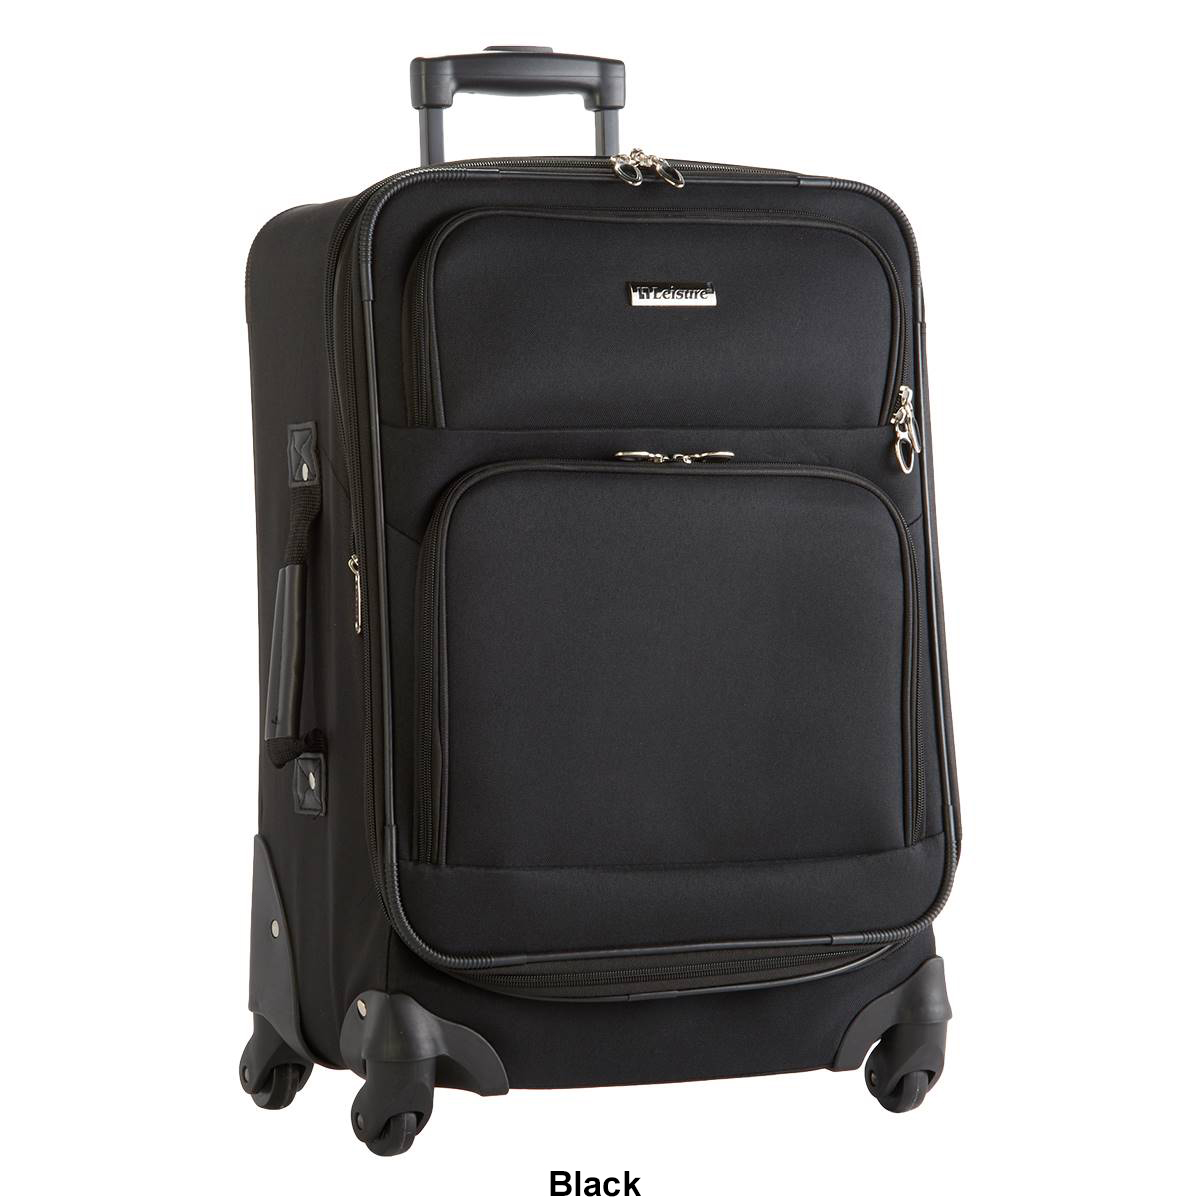 Leisure Catalina 25in. Spinner Luggage